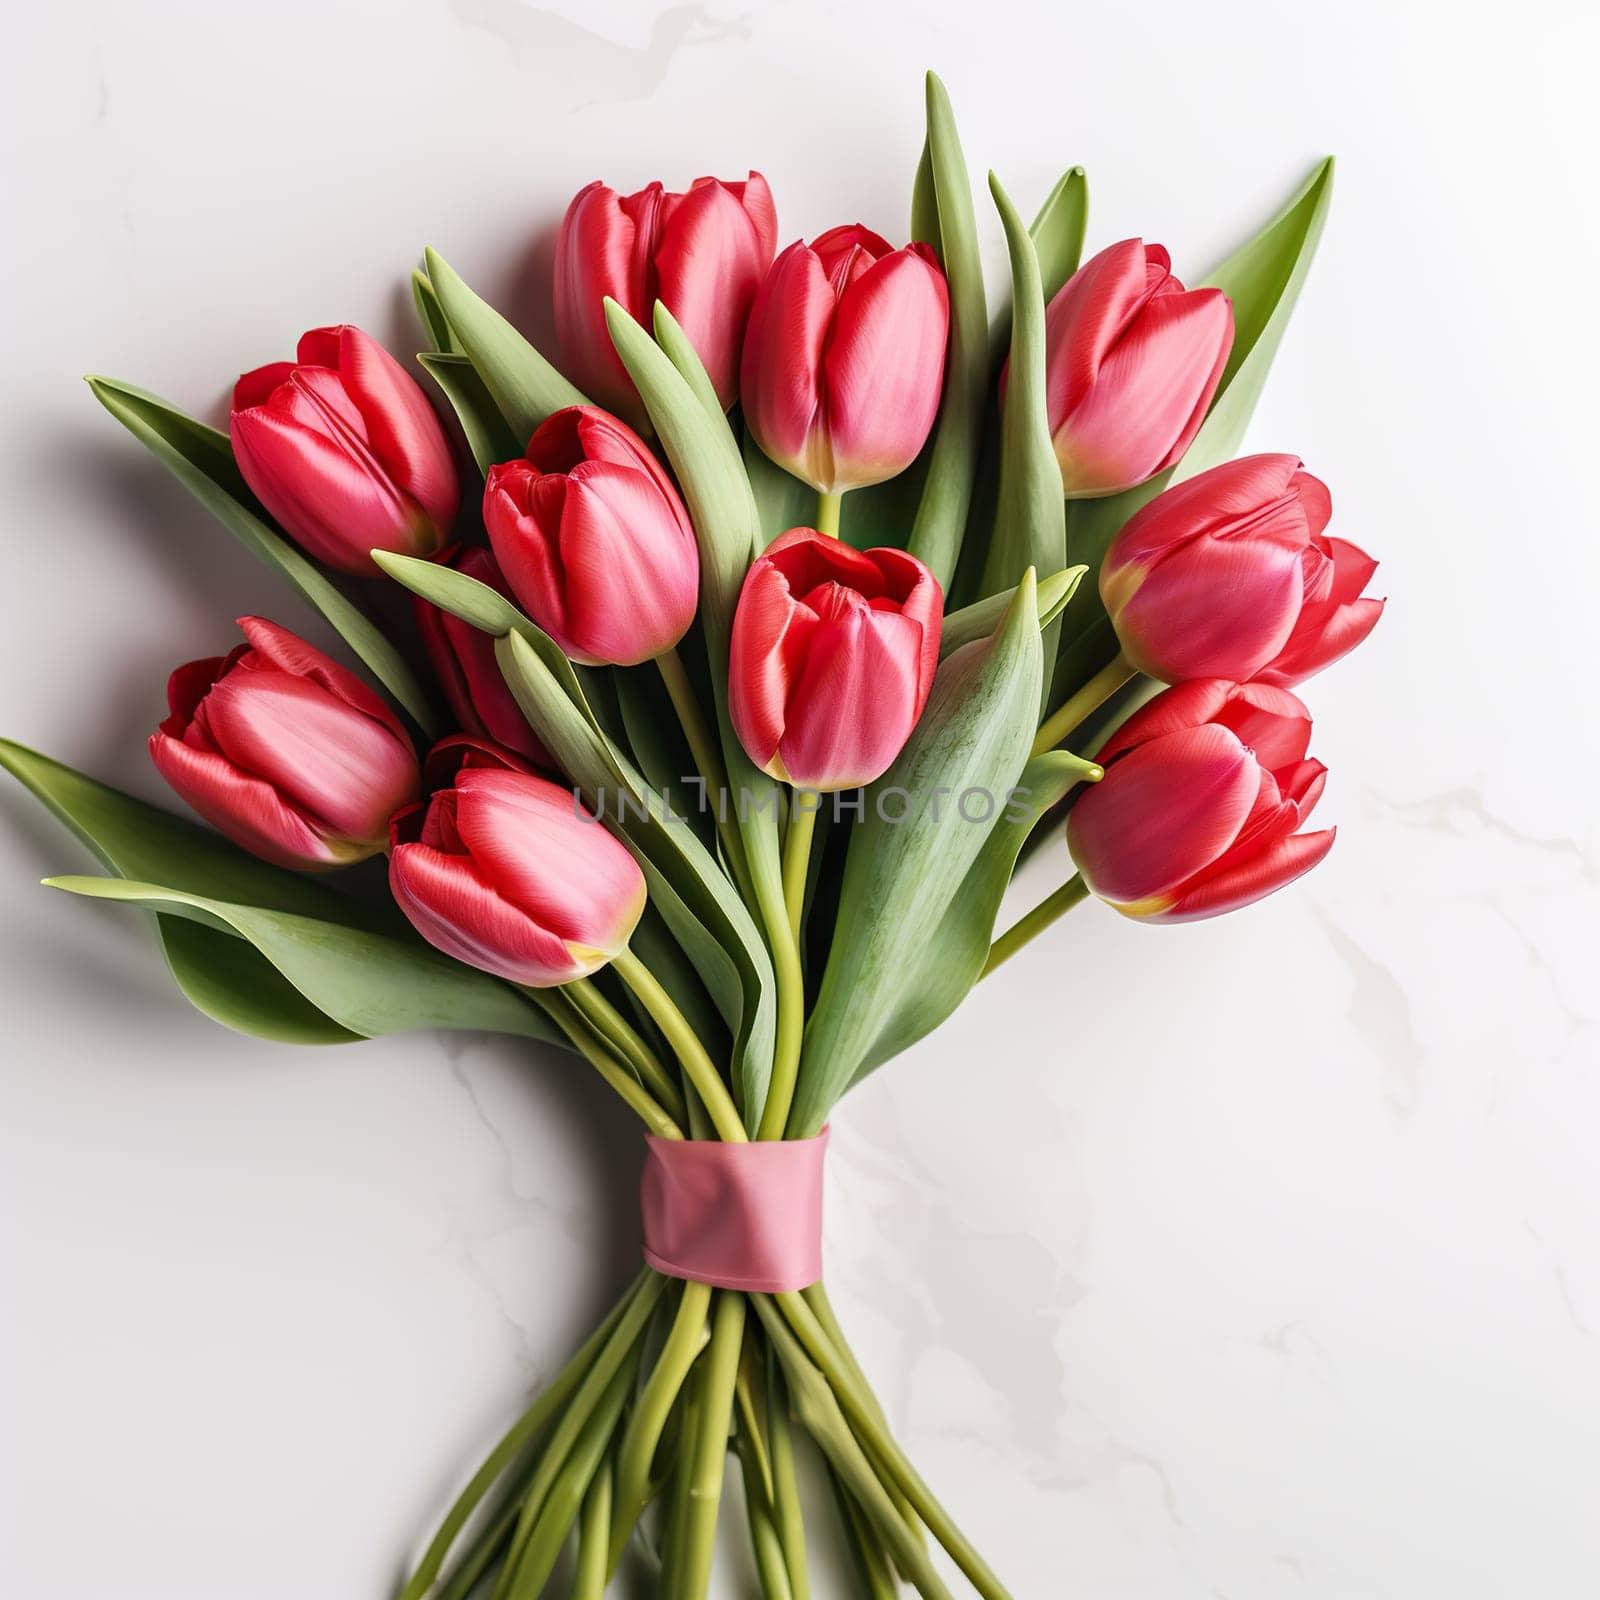 A bouquet of beautiful red tulips on a marble tabletop. Mother's Day, March 8, birthday.